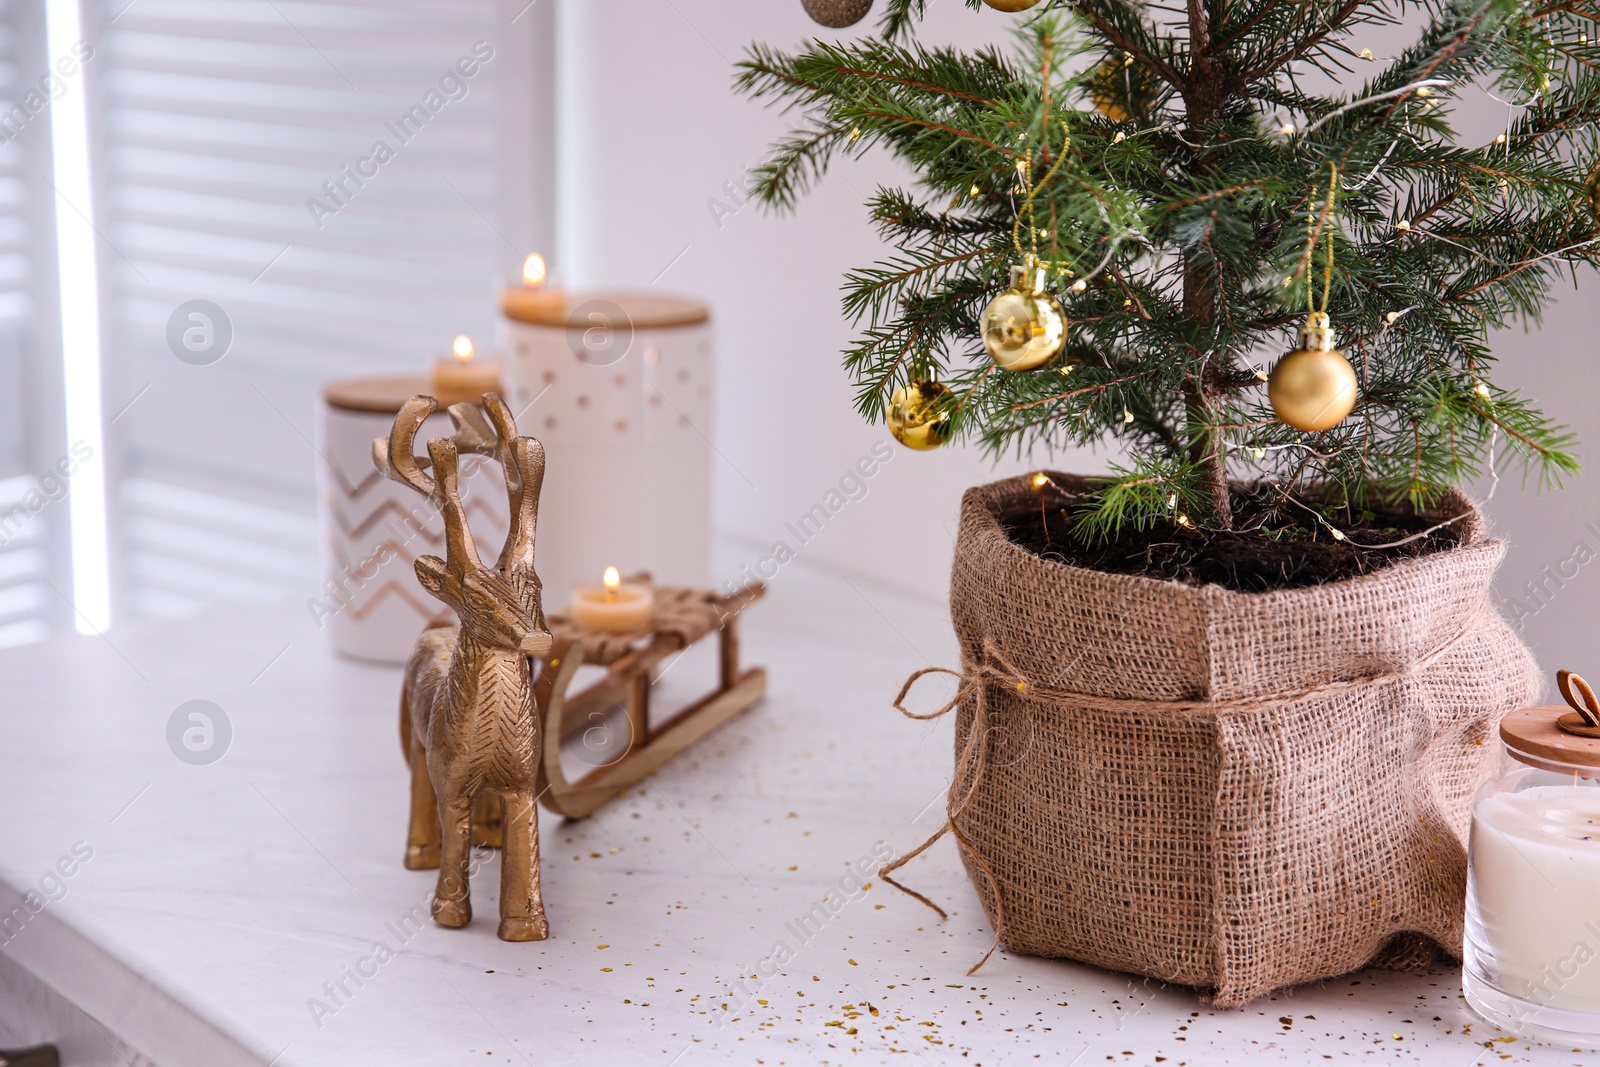 Photo of Small decorated Christmas tree and reindeer figure on countertop in kitchen, closeup